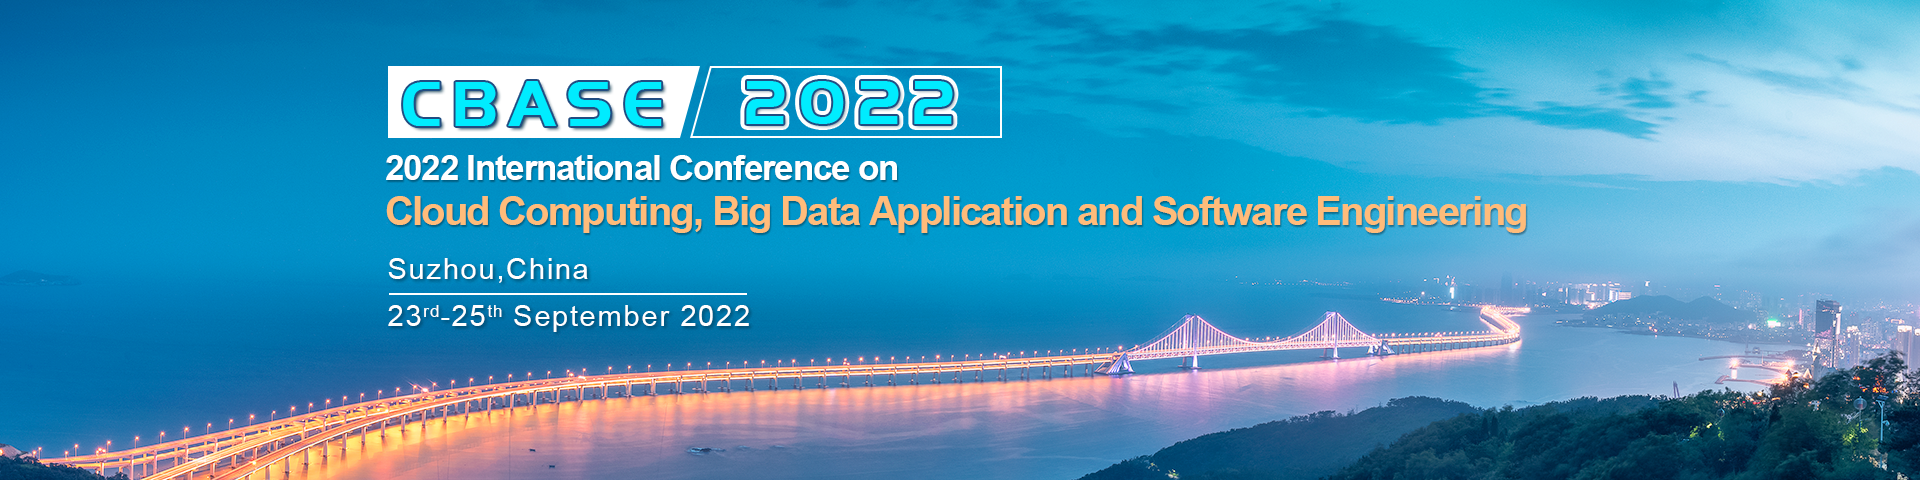 2022 International Conference on Cloud Computing, Big Data Application and Software Engineering (CBASE 2022), Online Event